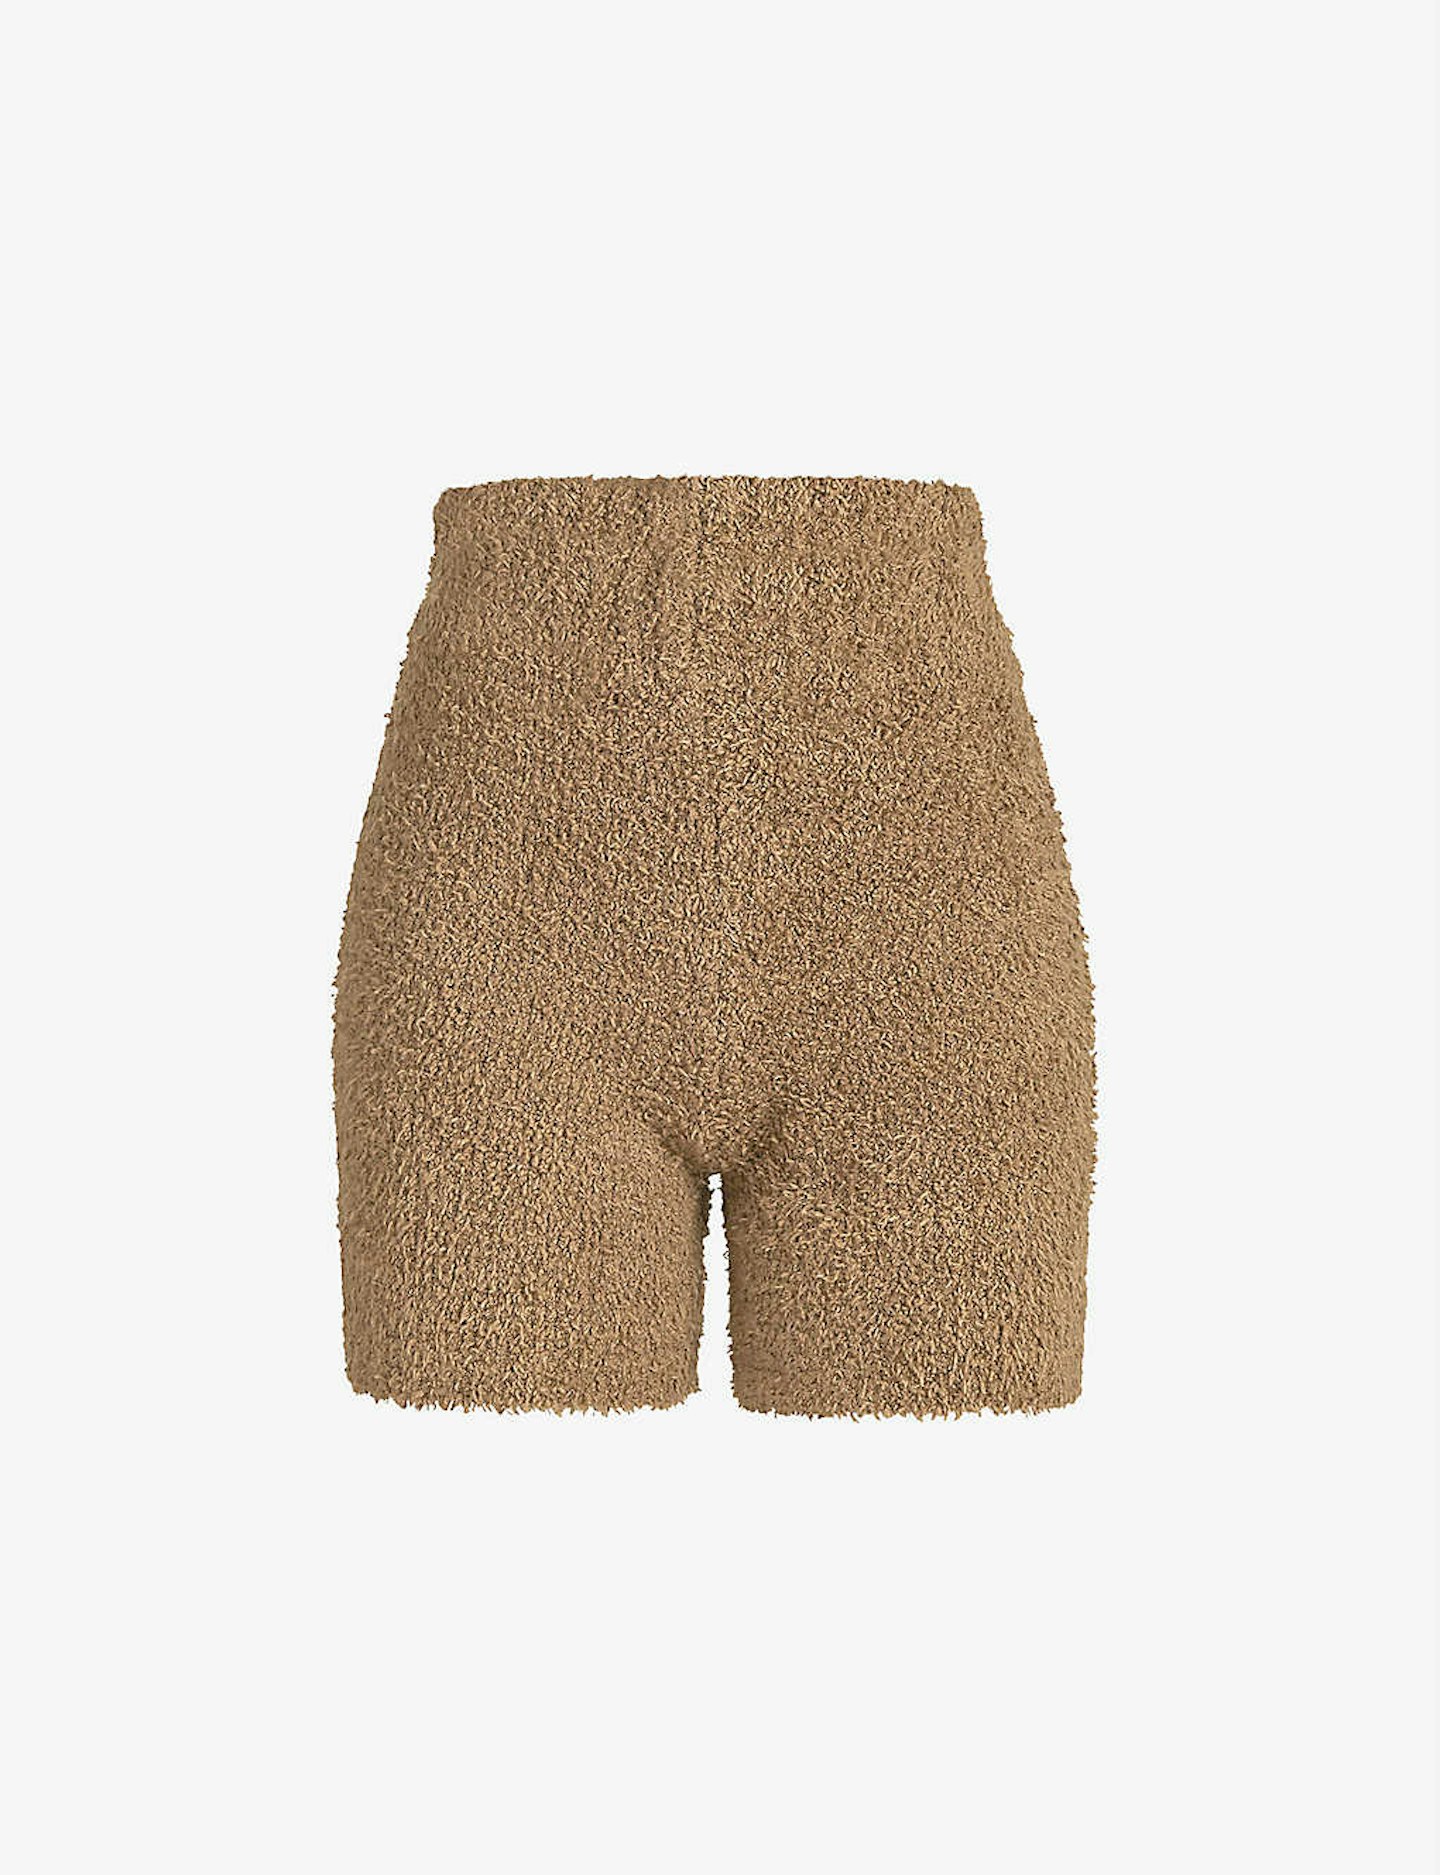 SKIMS, Cozy Boucle Knitted Shorts, £68